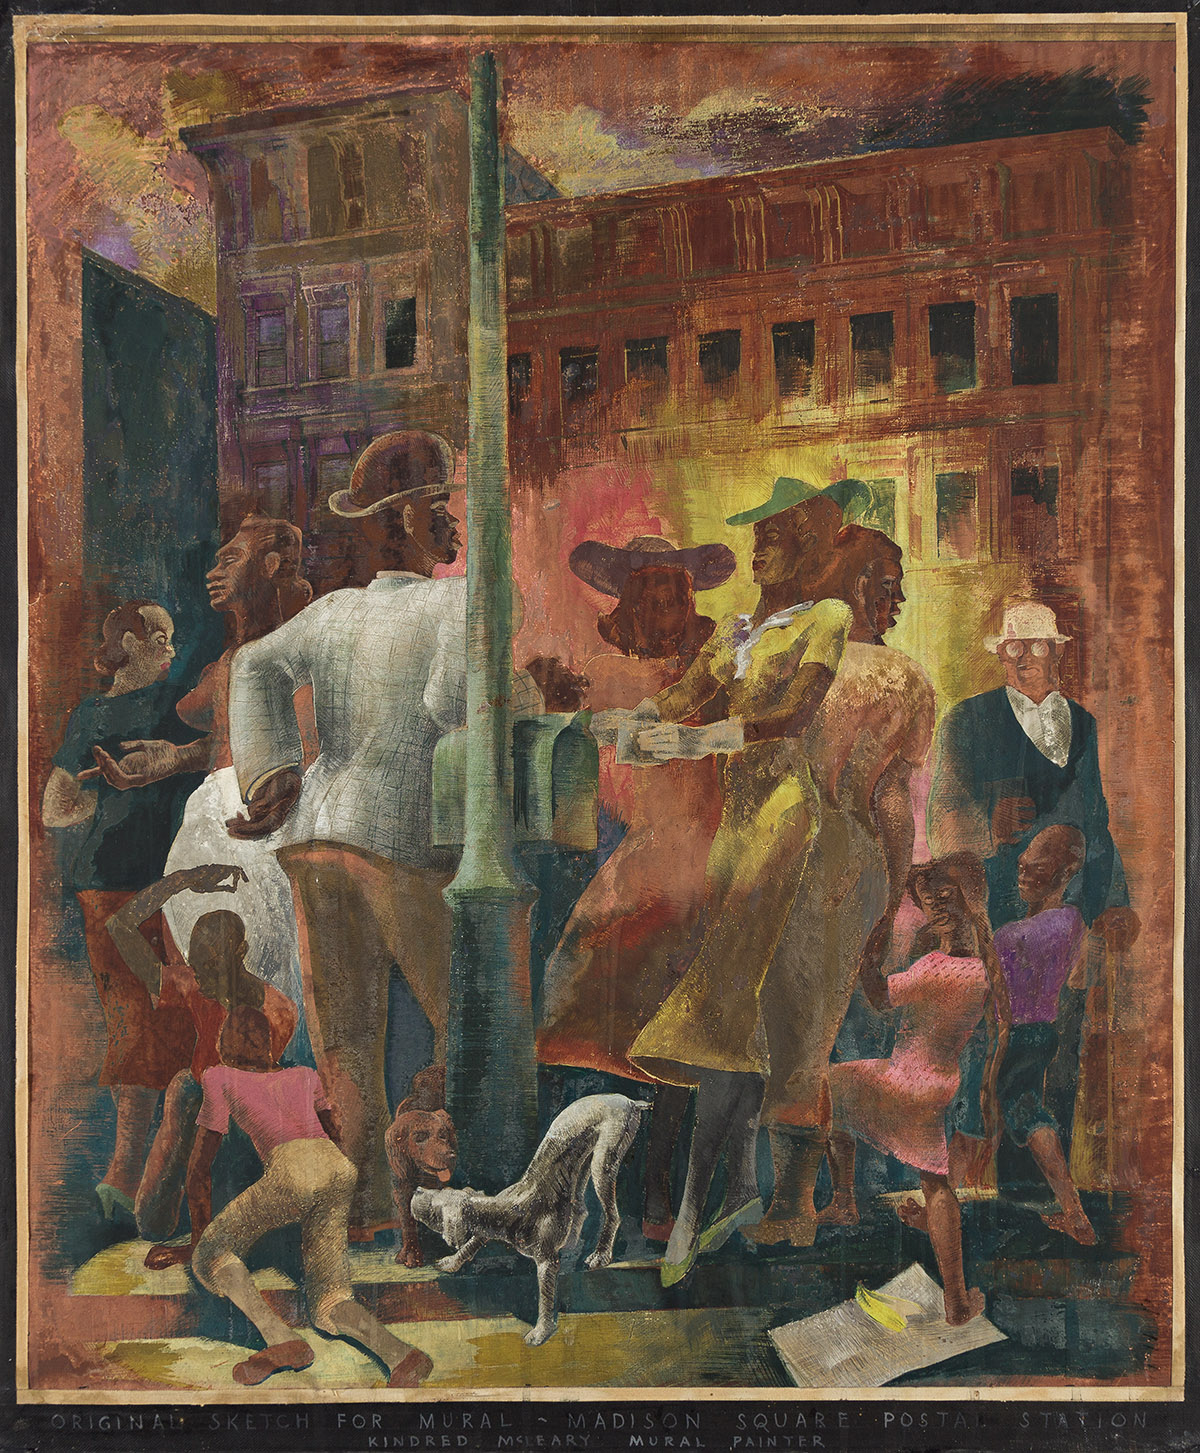 KINDRED MCLEARY (1901-1949) Scenes of New York, Harlem, (Mural Study).